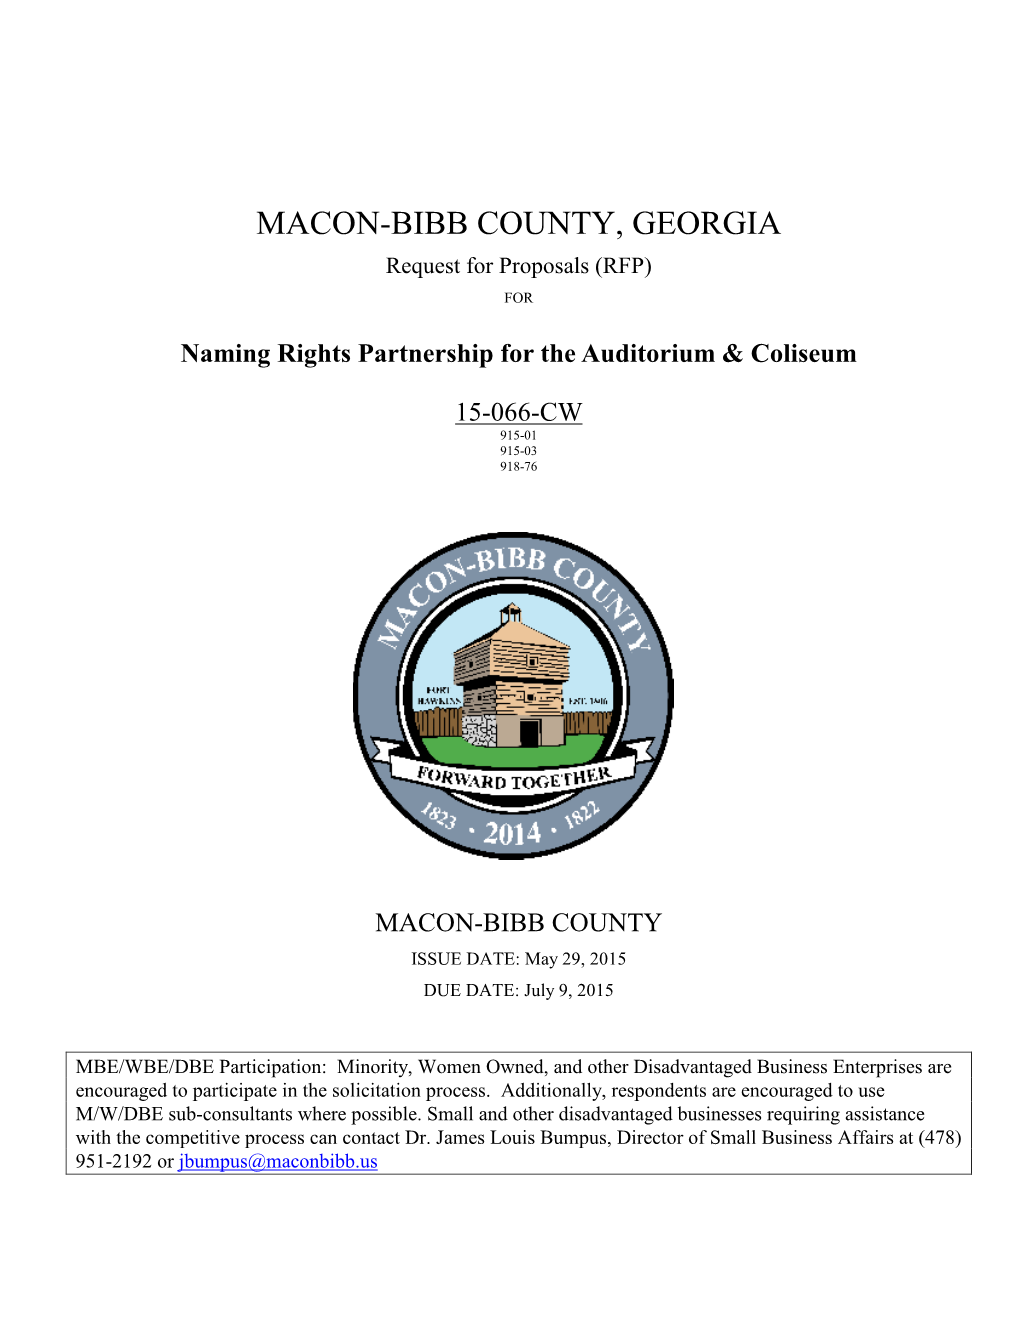 BIBB COUNTY, GEORGIA Request for Proposals (RFP) FOR